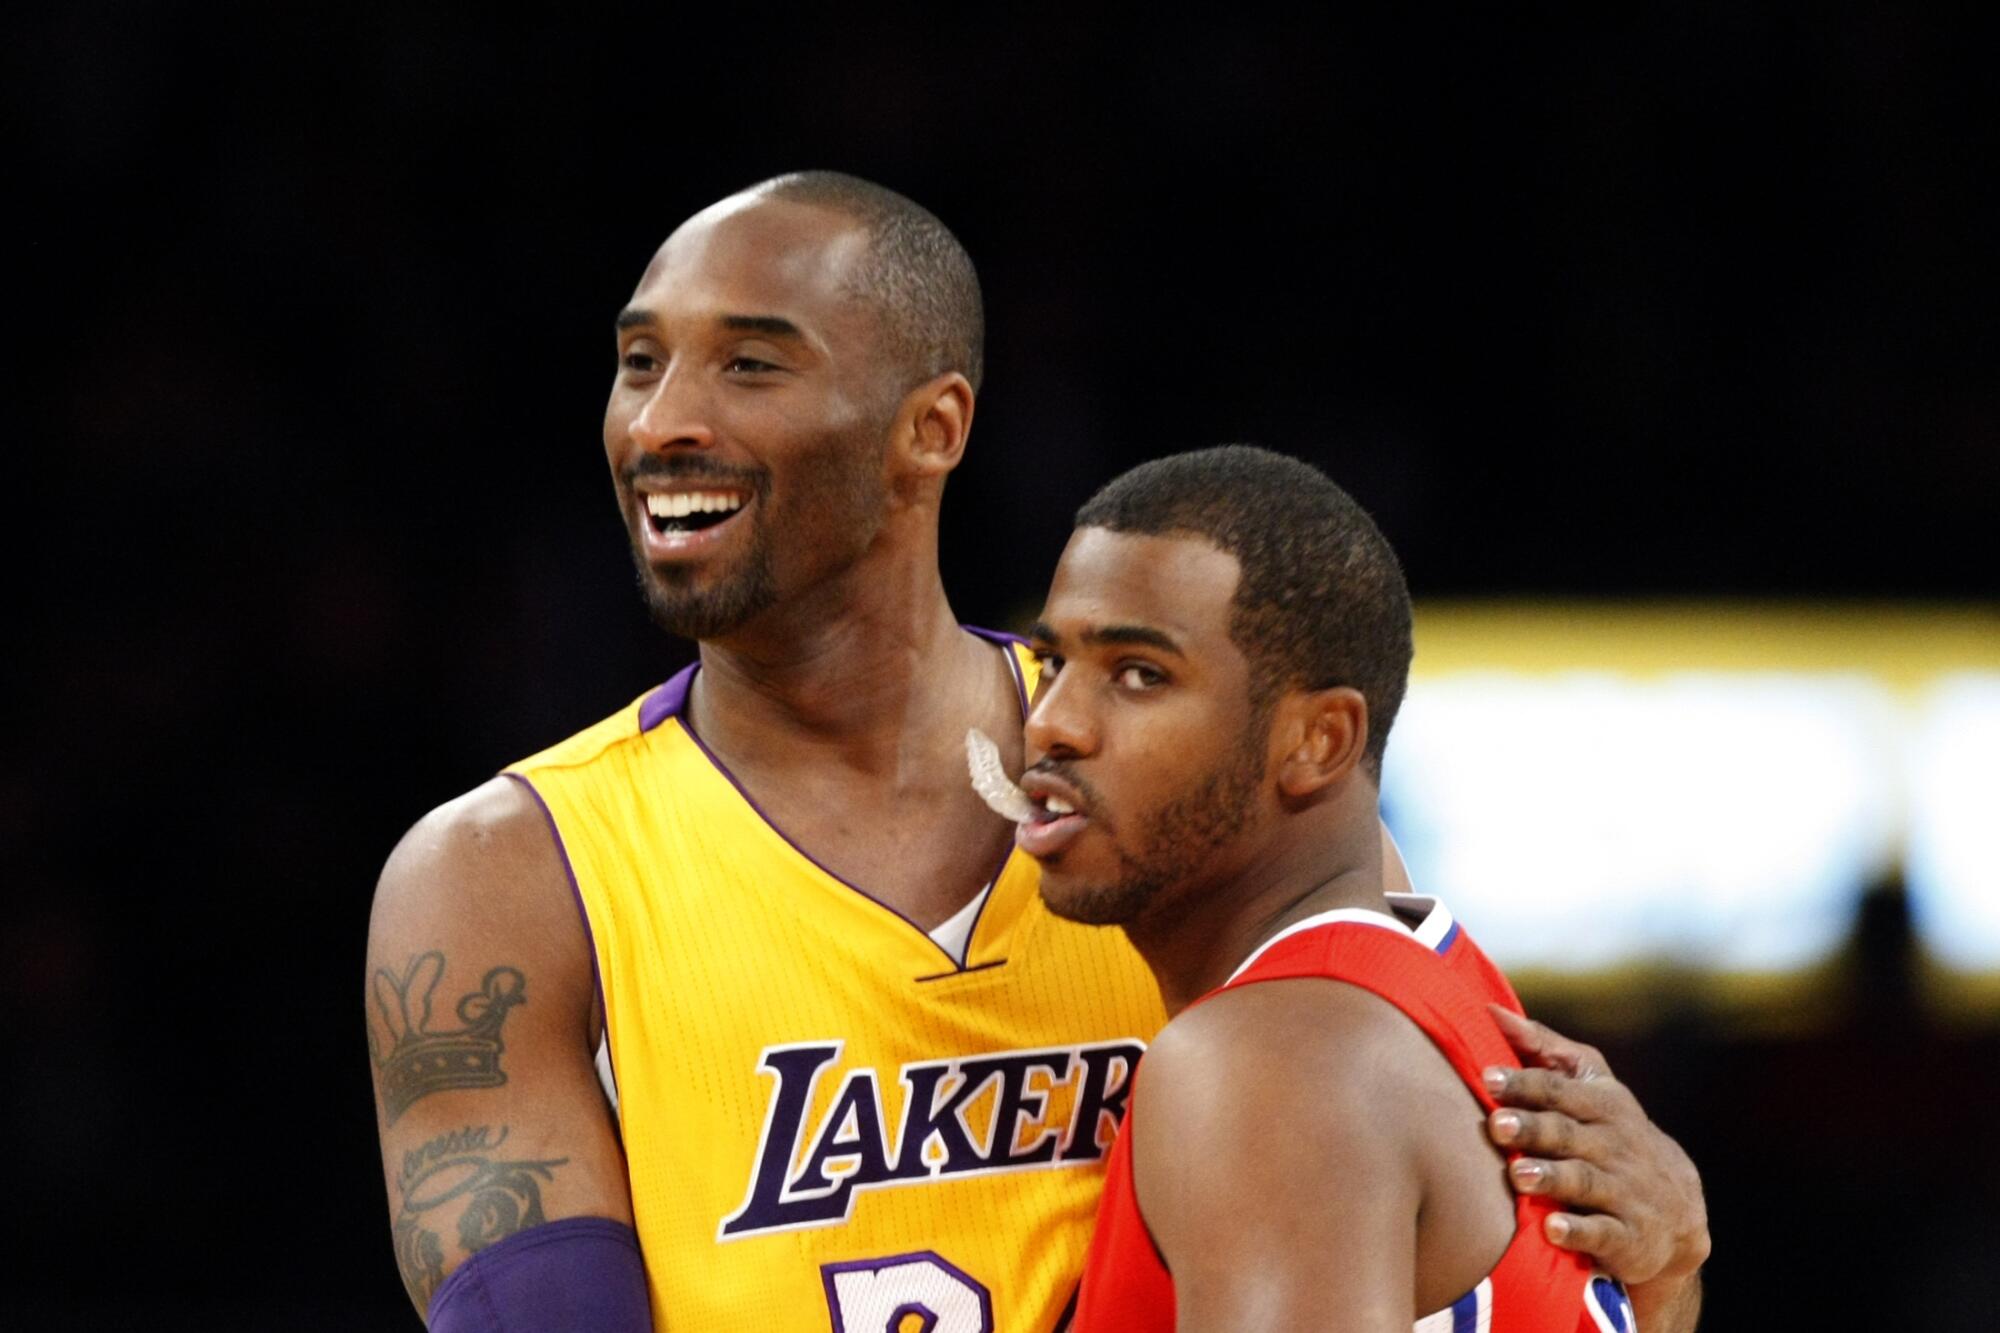 All-Star guards Kobe Bryant, left, and Chris Paul embrace before a Lakers-Clippers preseason game in 2011.